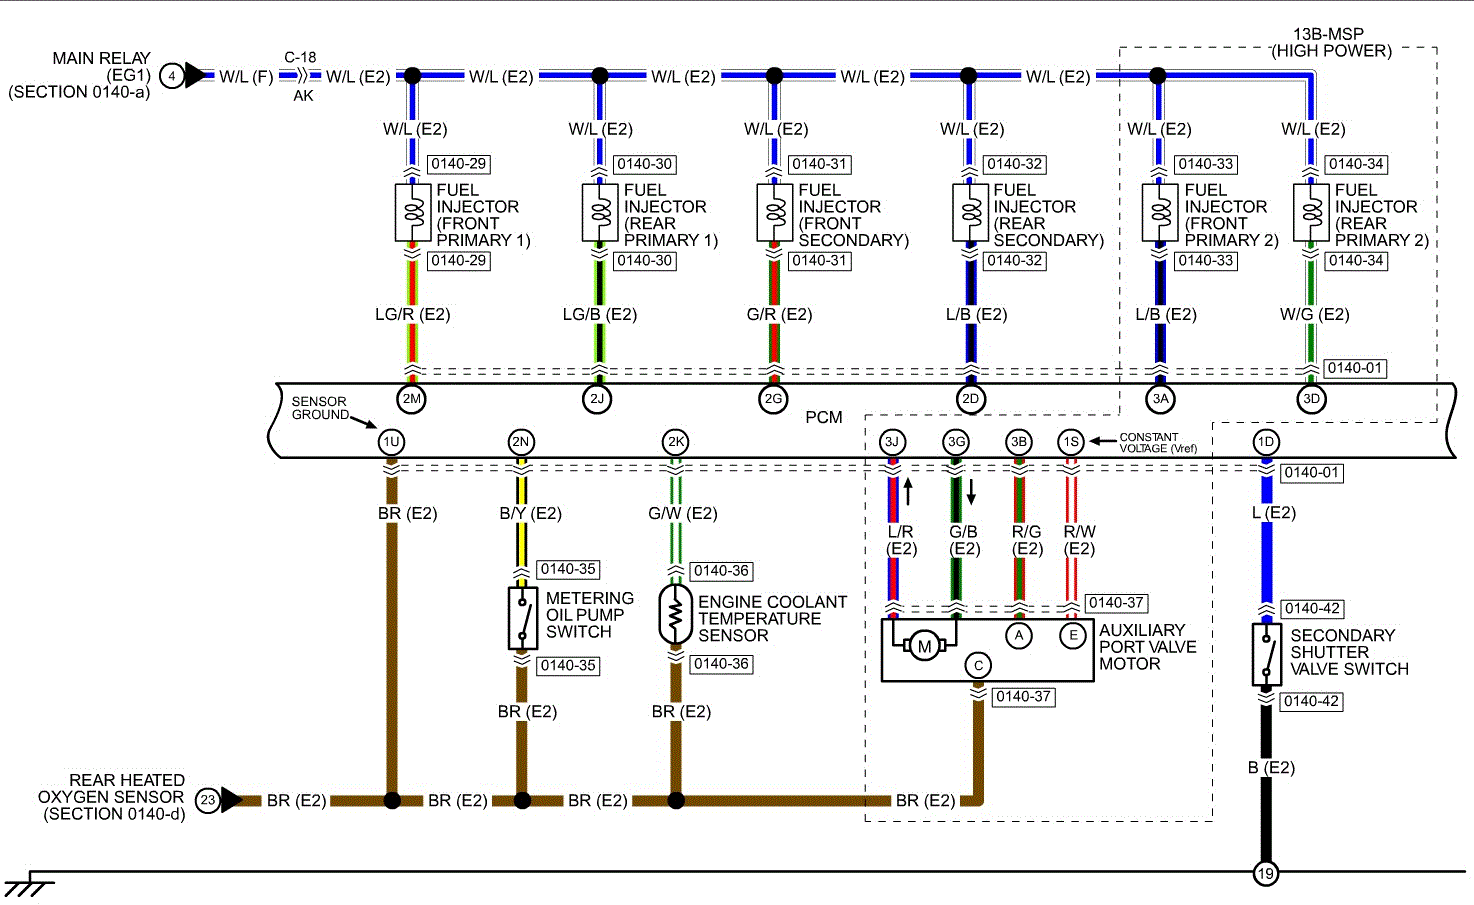 Howell Electric Motors Wiring Diagram from www.rx8club.com